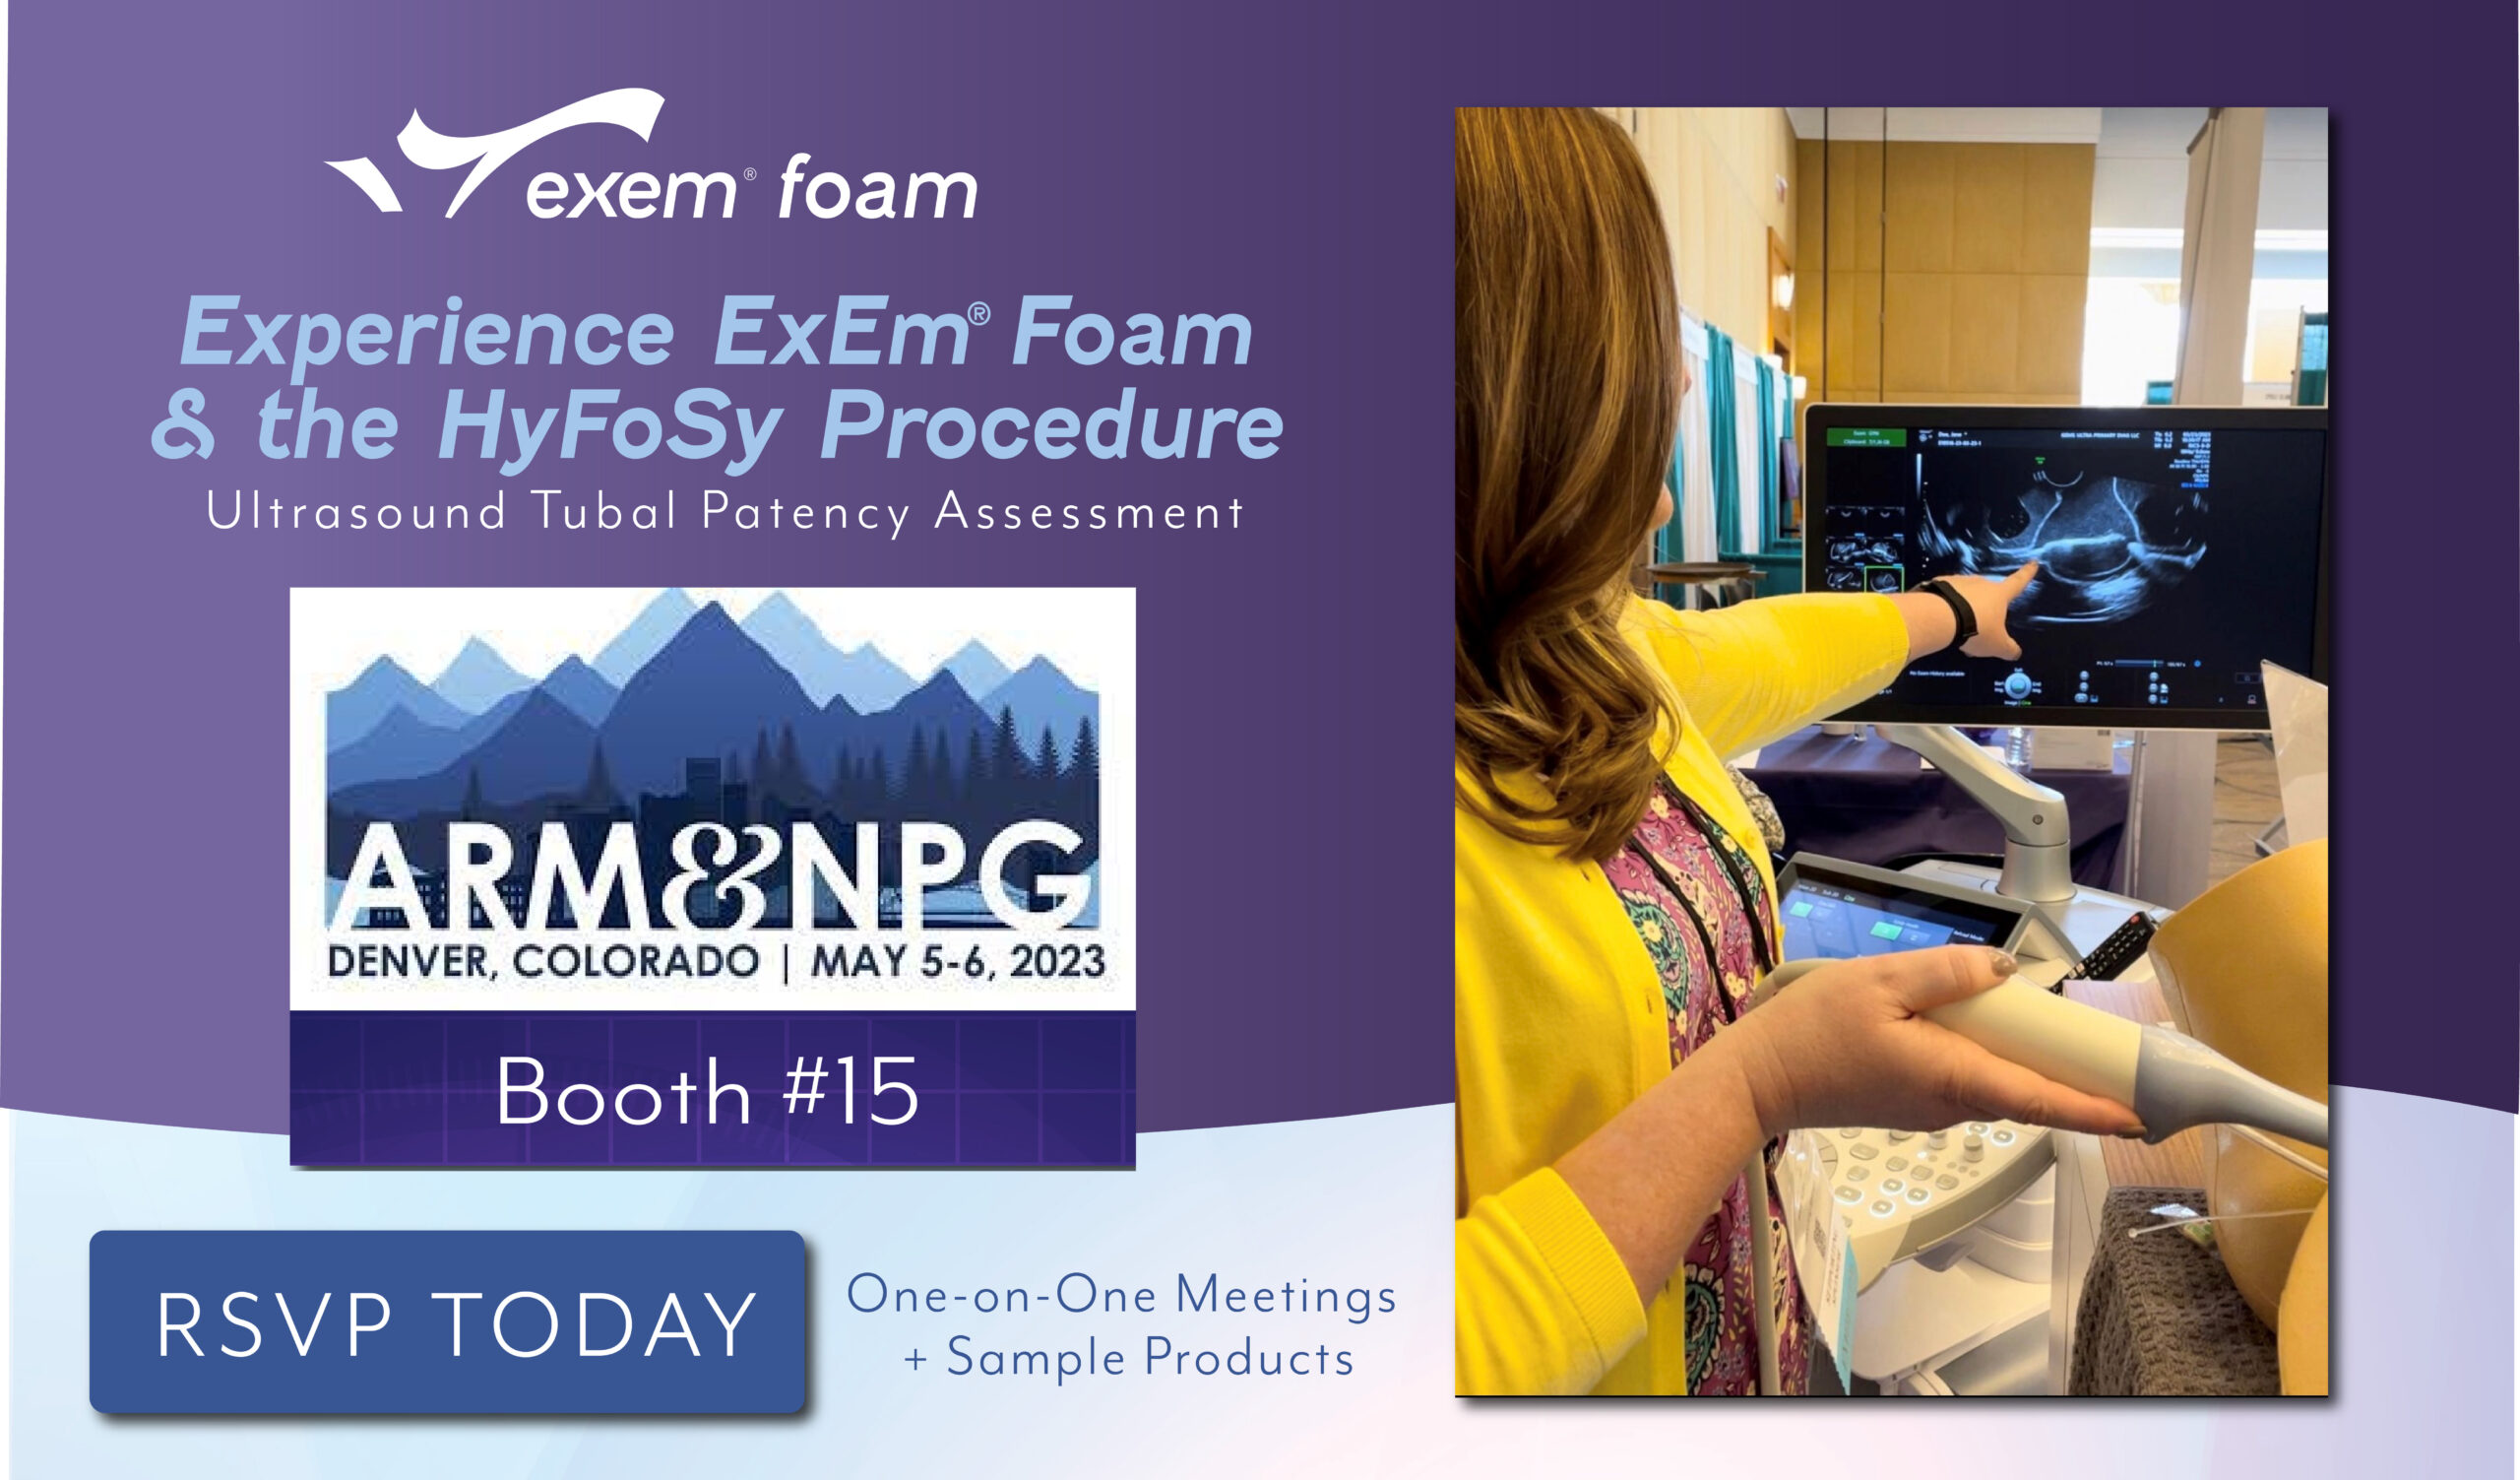 ExEm Foam booth at PCRS 2023